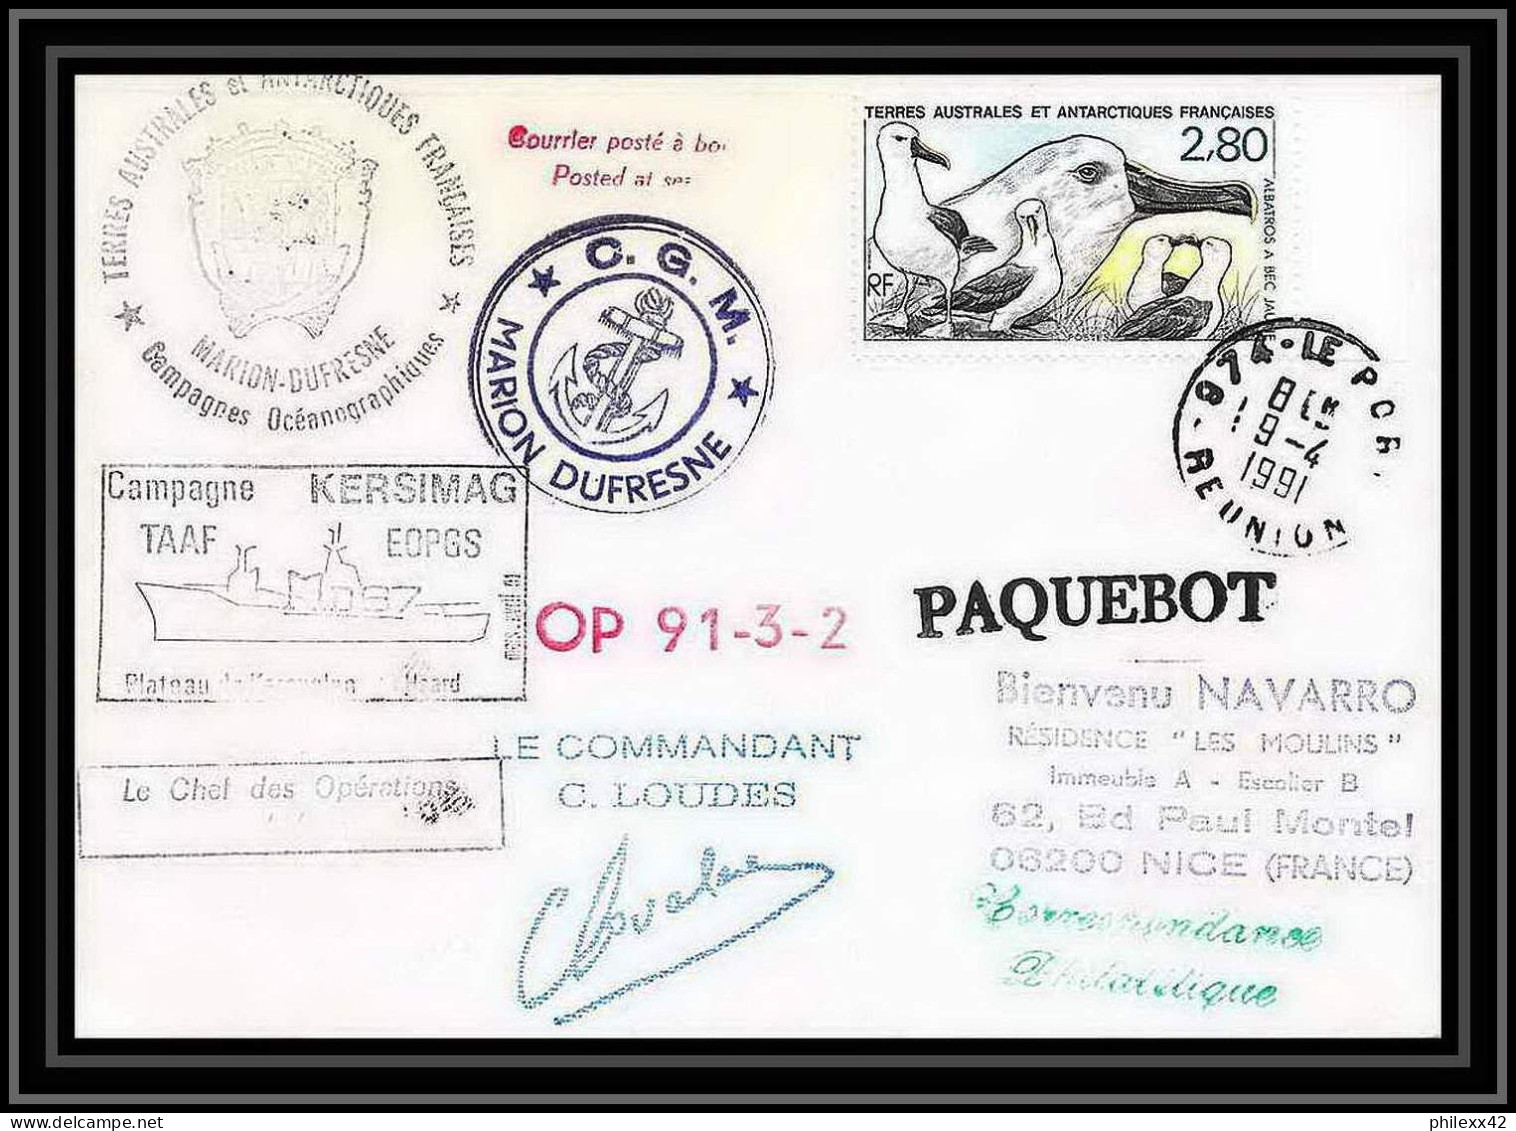 1772 Campagne Kersimag Op 91-3-2 Signé Signed Loudes 9/4/1991 La Reunion TAAF Antarctic Terres Australes Lettre (cover) - Antarctic Expeditions